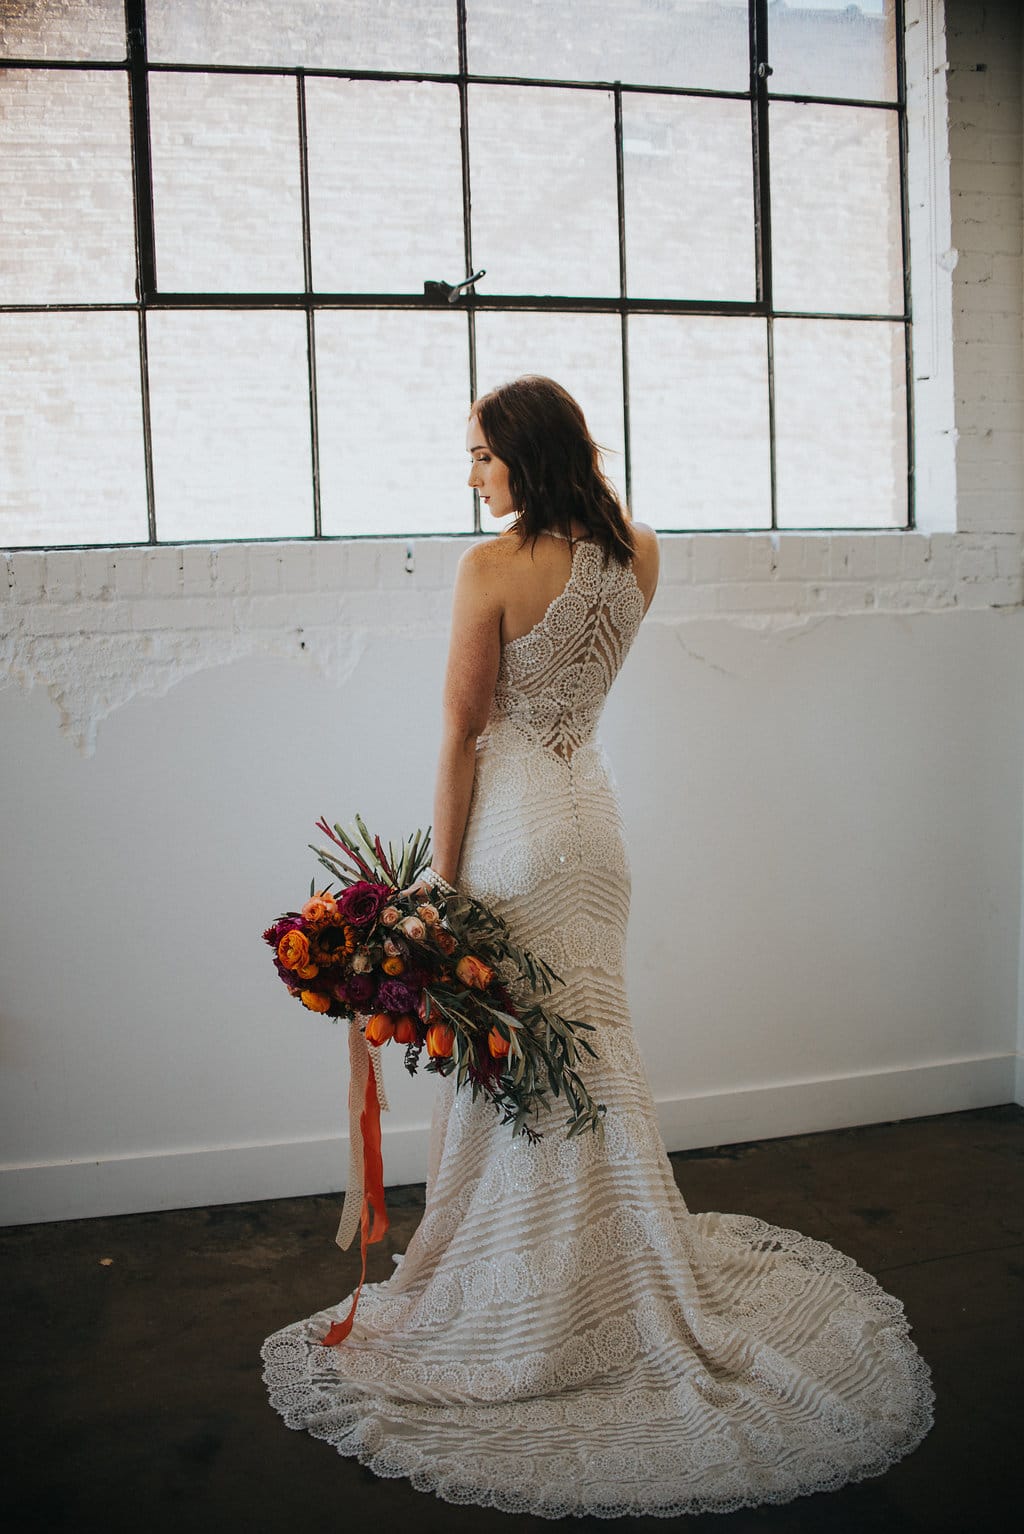 Lush Floral Palette with Unique Lace Wedding Dress - Styled Shoot featuring Bexley by Sottero and Midgley